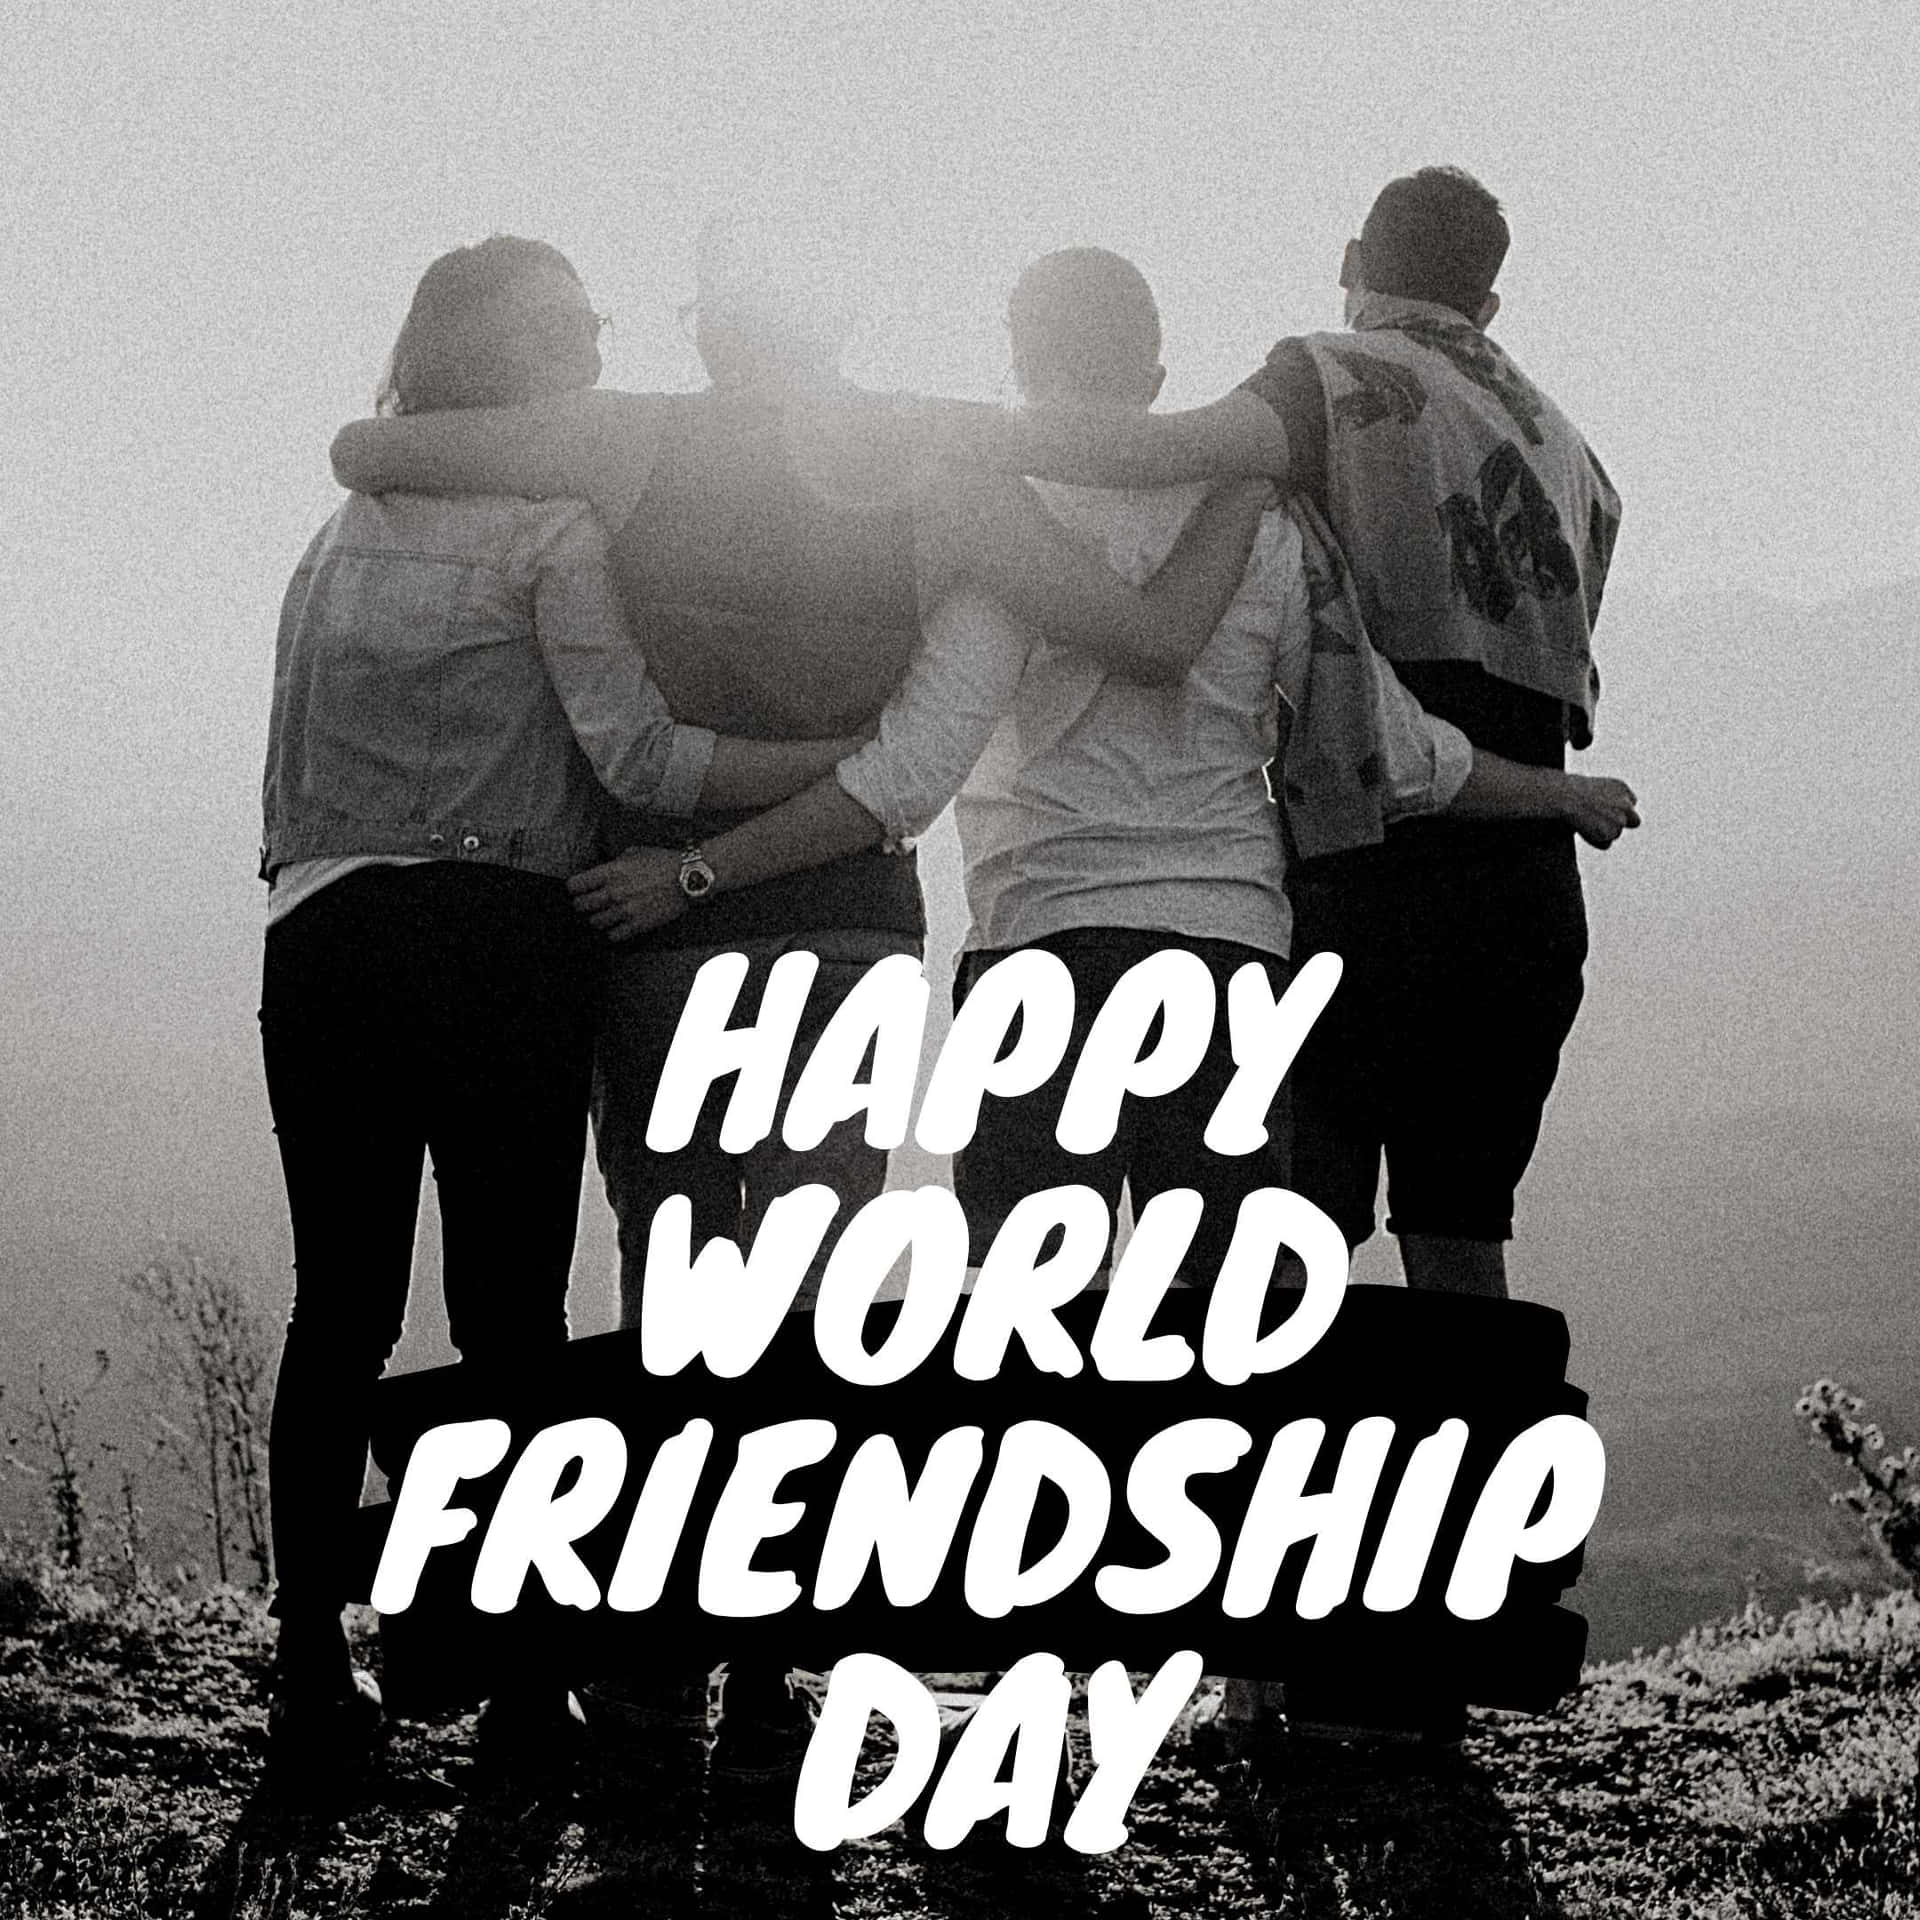 Celebrate the bond of true friendship on Friendship Day with this heartwarming picture